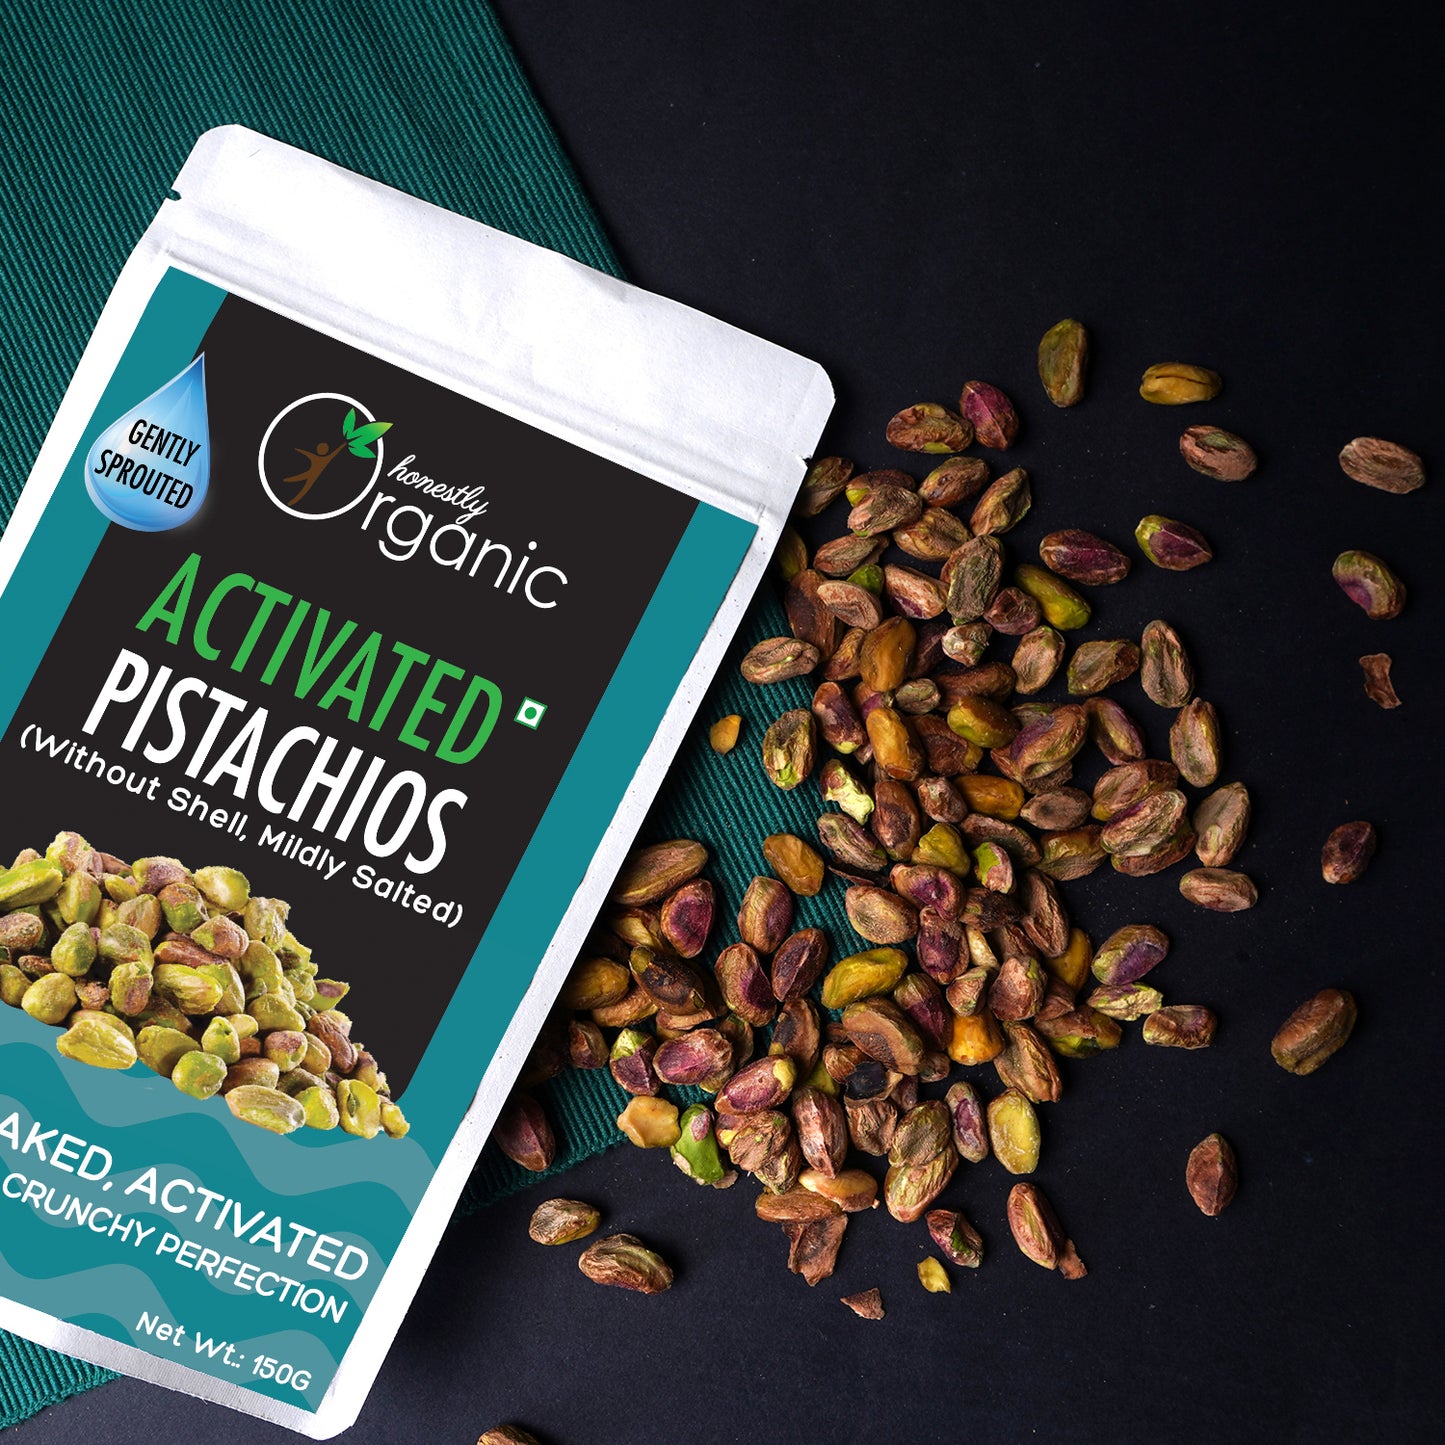 
                  
                    Activated/Sprouted Pistachios - Mildly Salted
                  
                